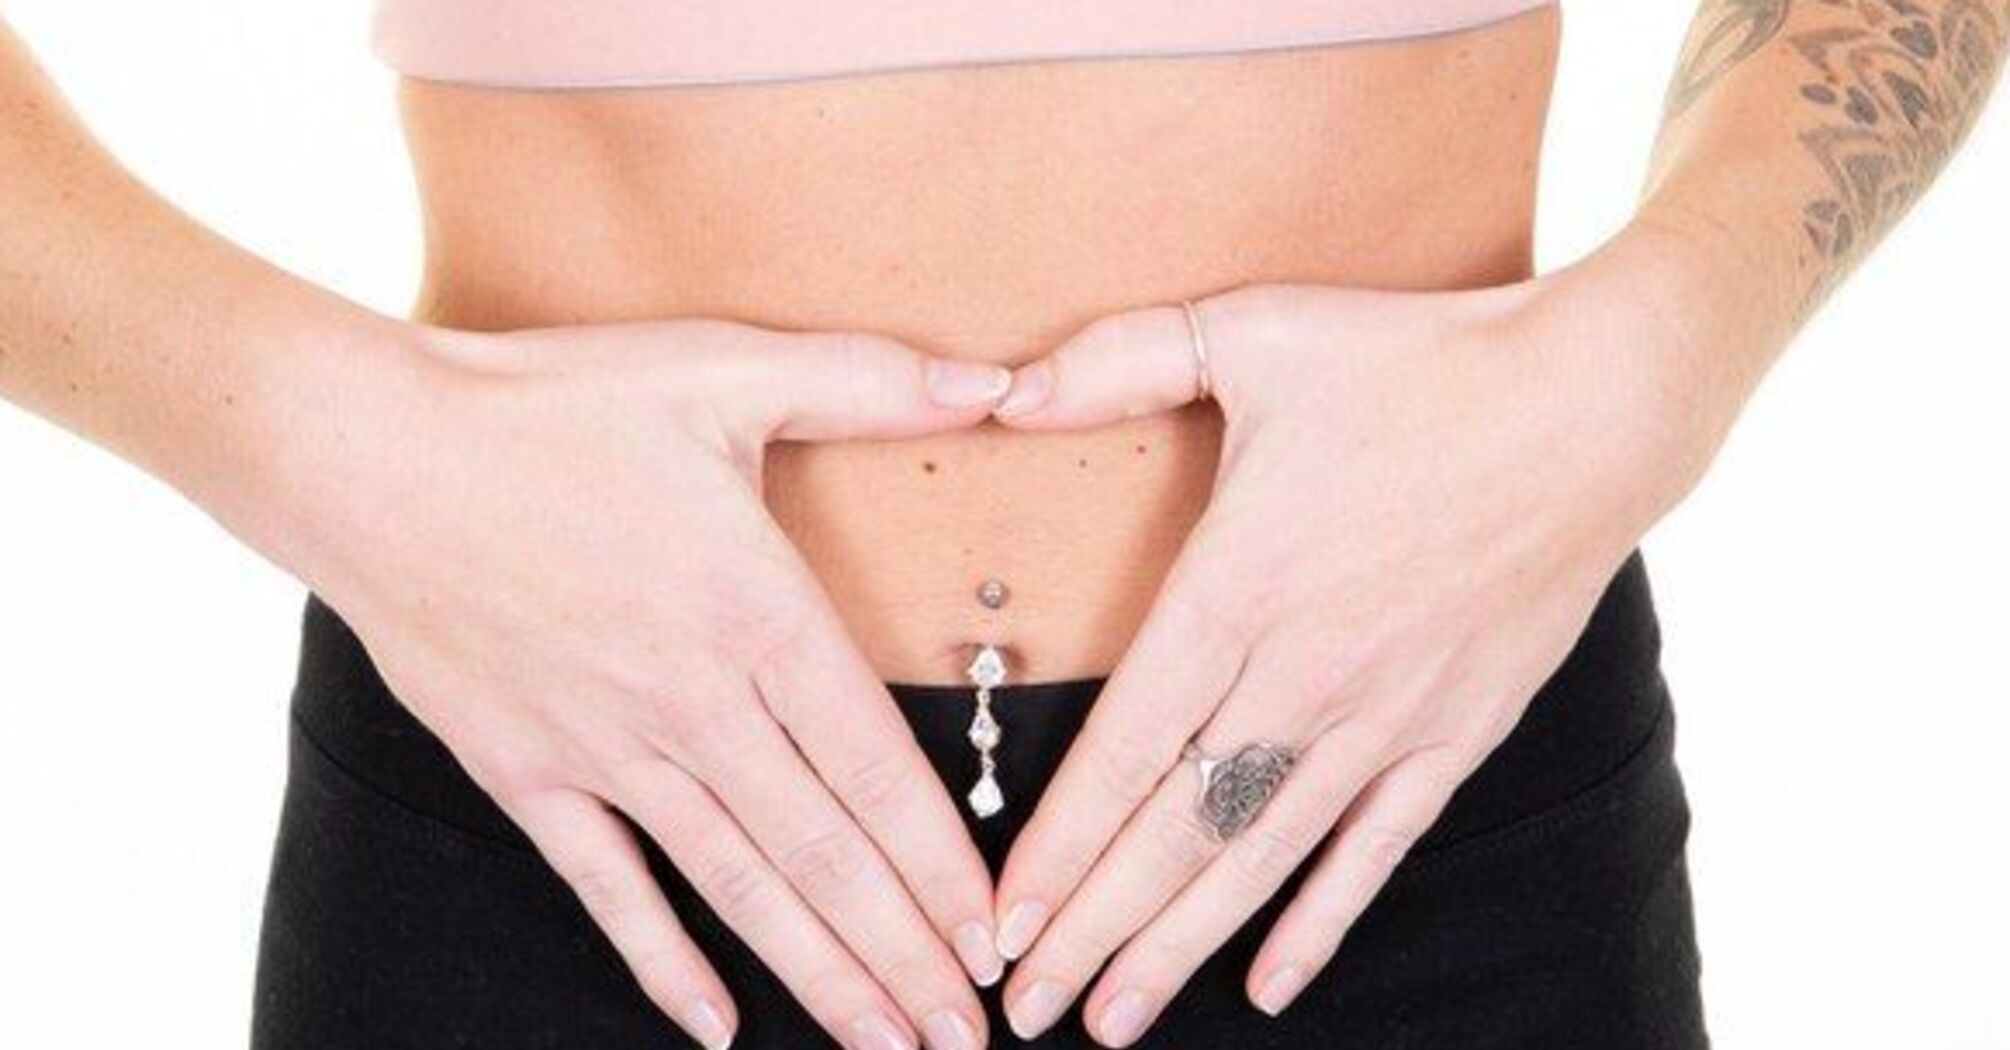 Advantages and disadvantages of navel piercing: What you need to know before the procedure